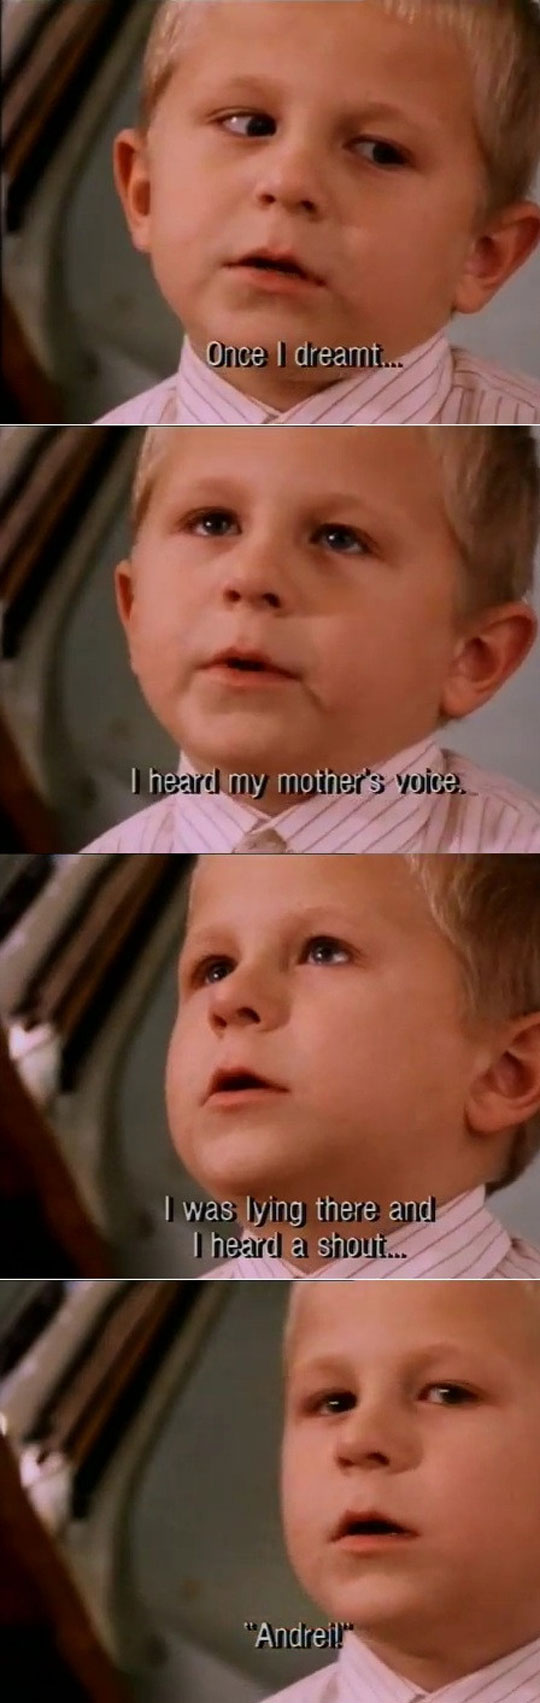 cute-kid-crying-hearing-dead-mothers-voice